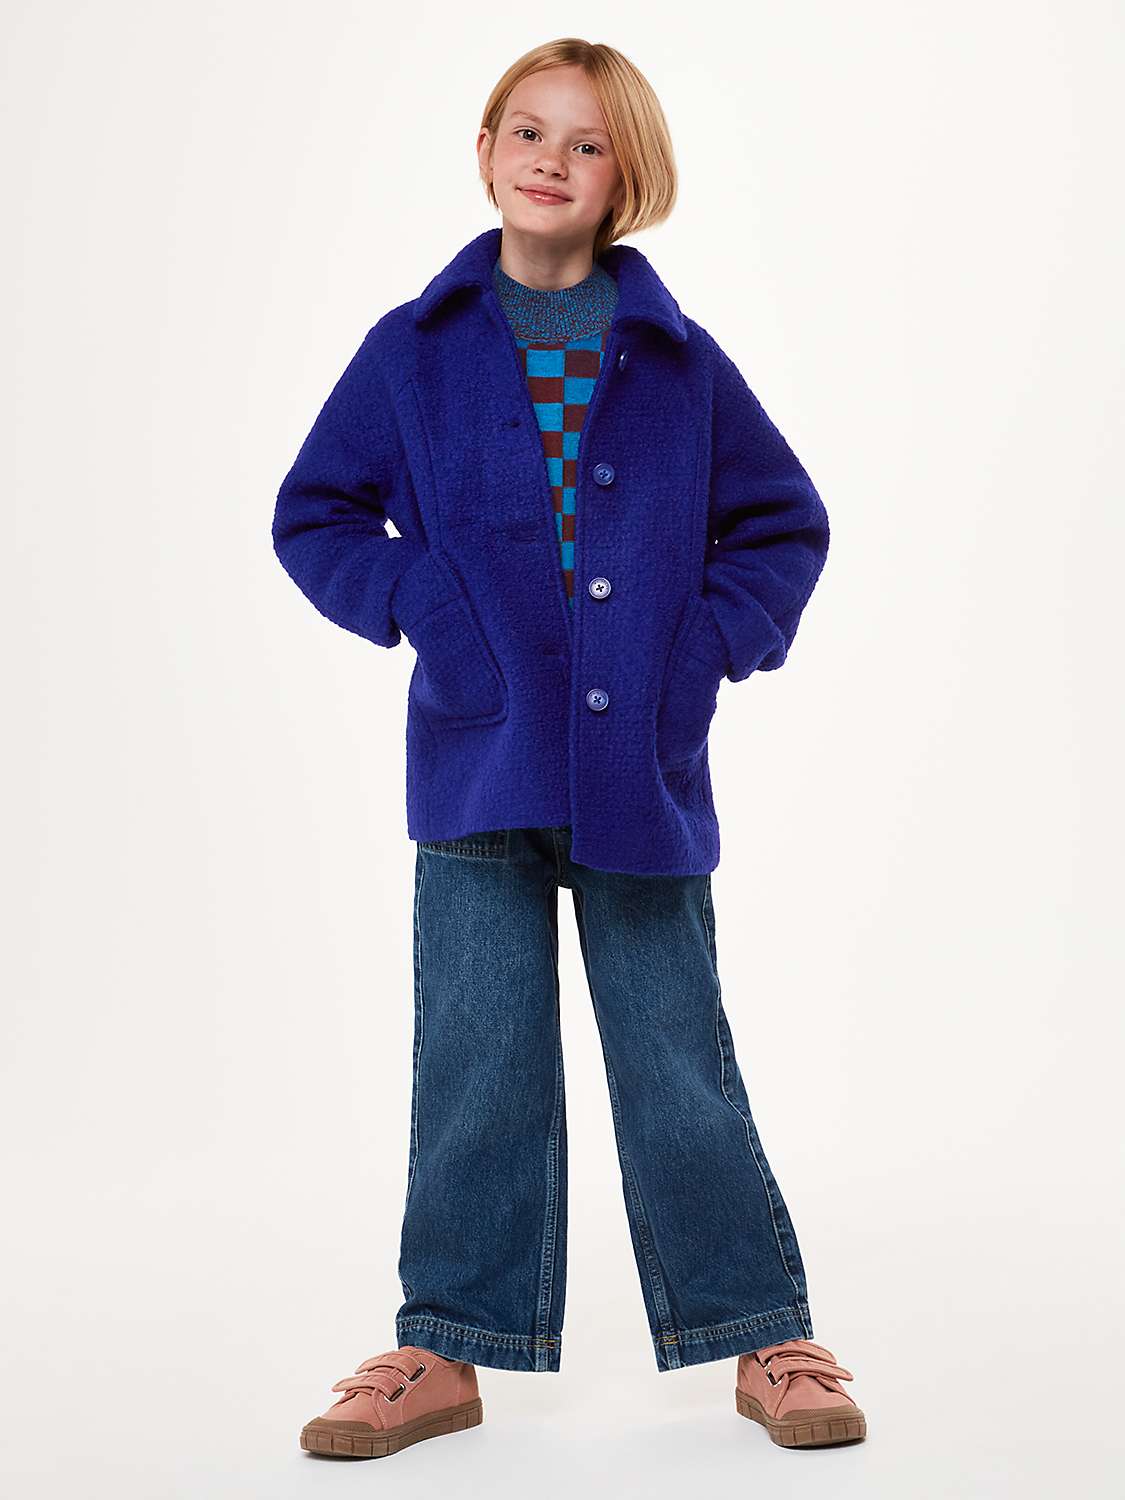 Buy Whistles Kids' Daisy Boucle Wool Blend Coat, Blue Online at johnlewis.com